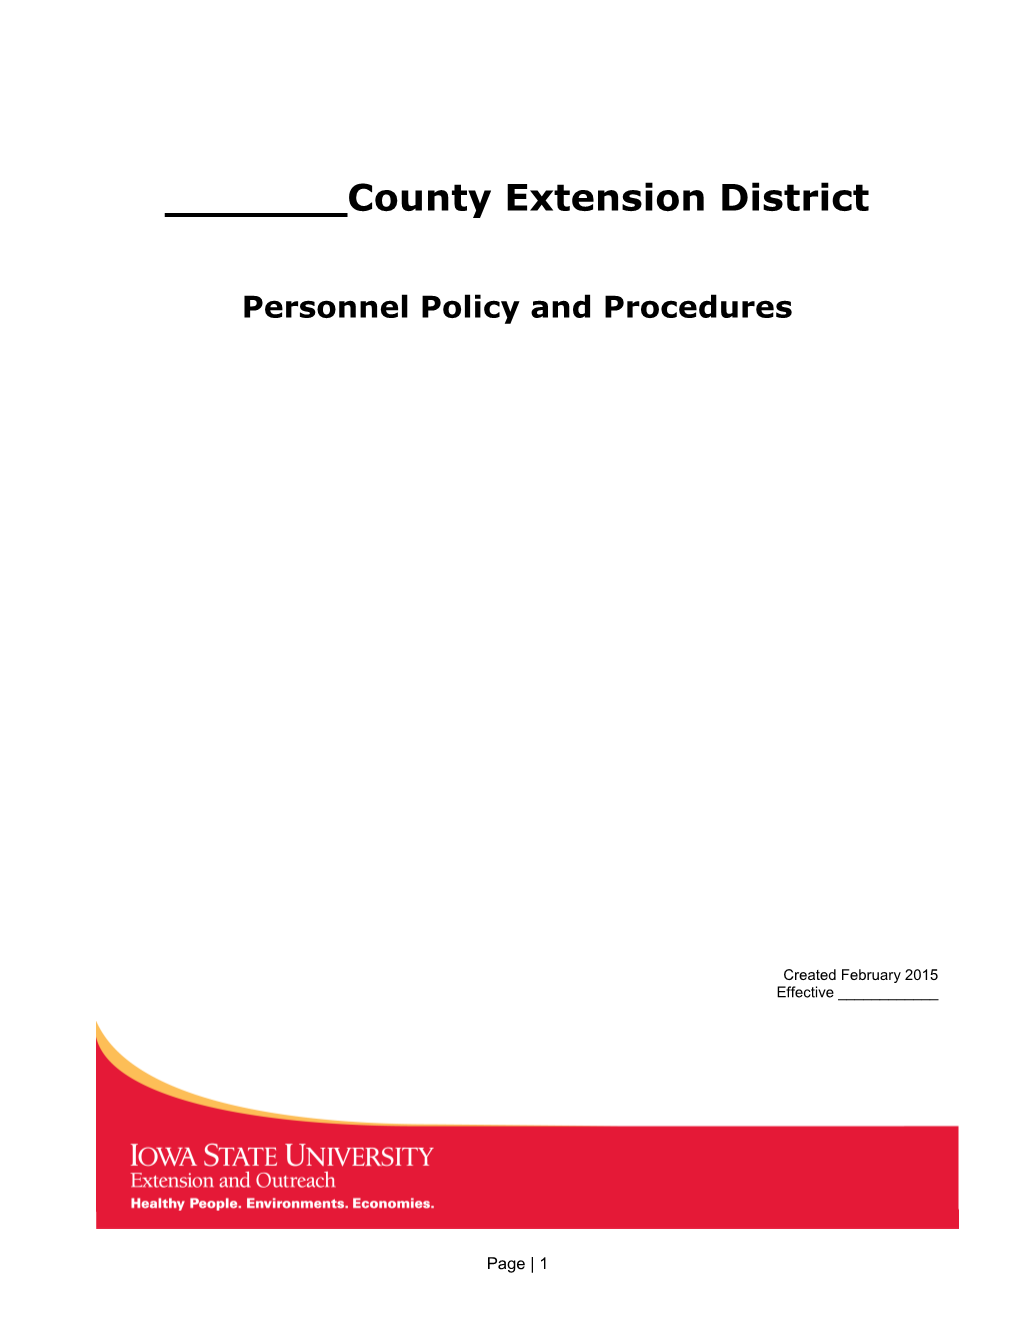 Personnel Policy and Procedures